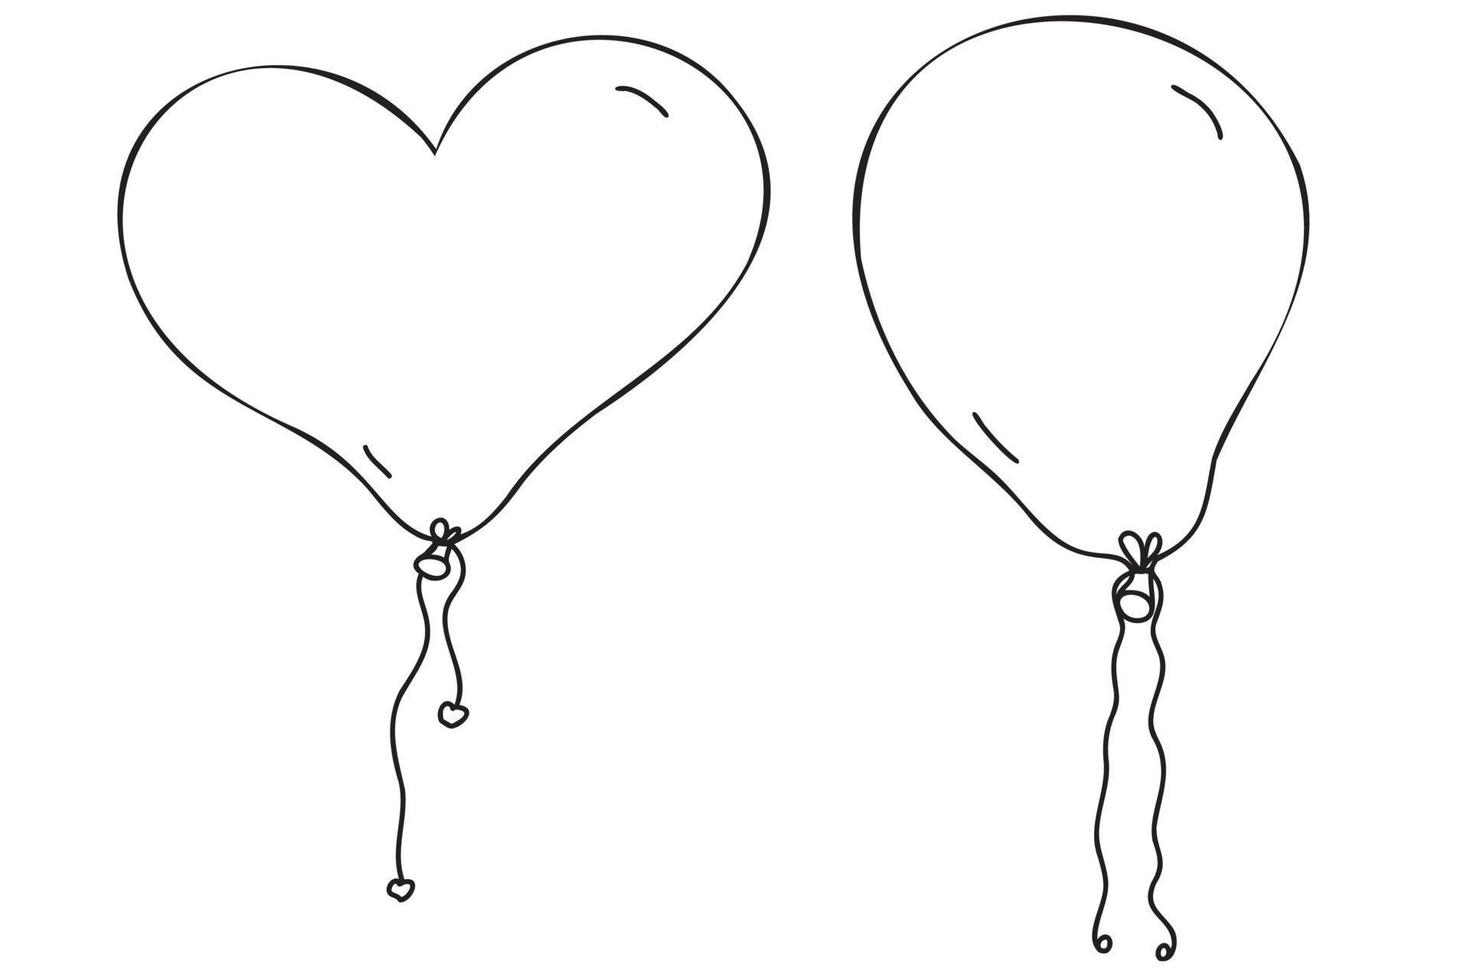 balloon drawn black outline heart-shaped and plain for birthdays, march 8, coloring, cards, fabric and clothes printing vector